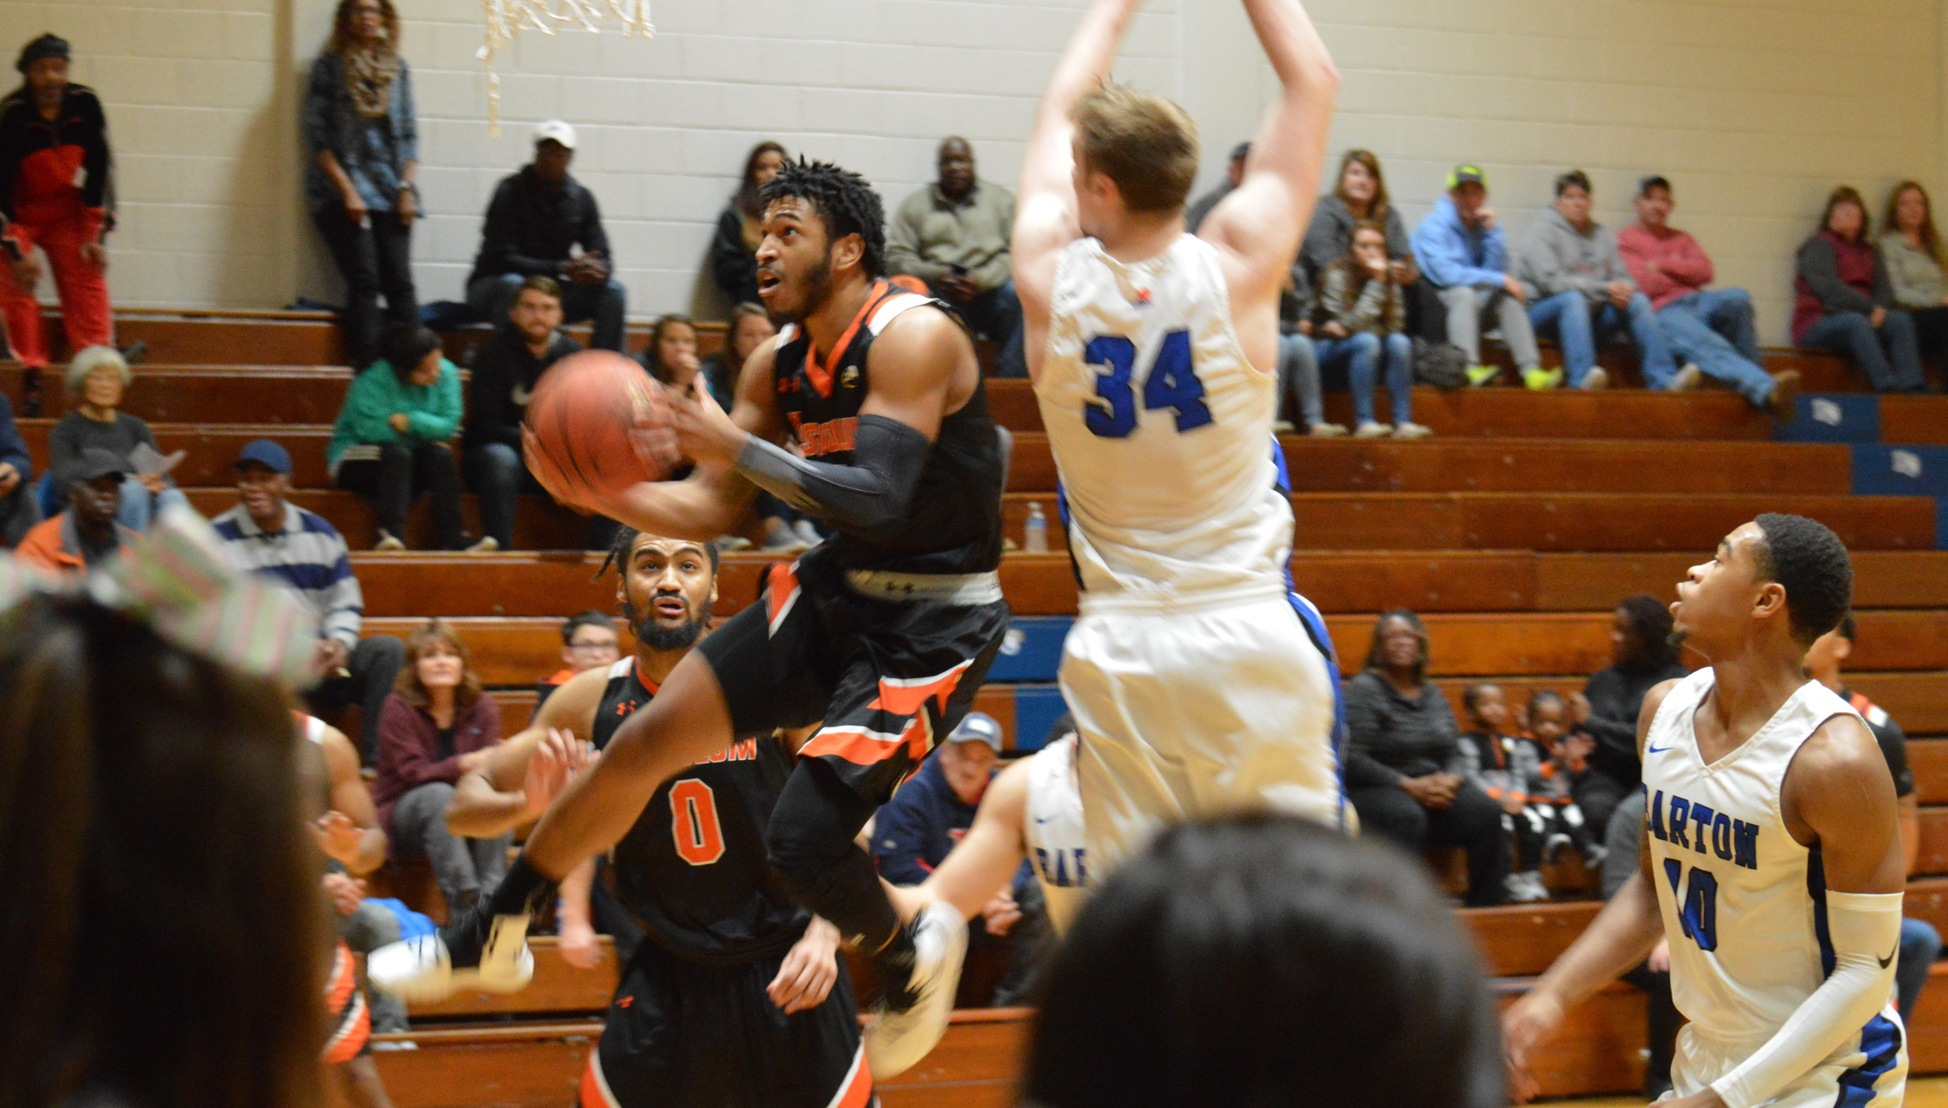 Tariq Jenkins scored 17 points and converted a three-point play late in the game in Tusculum's 91-87 win at Barton